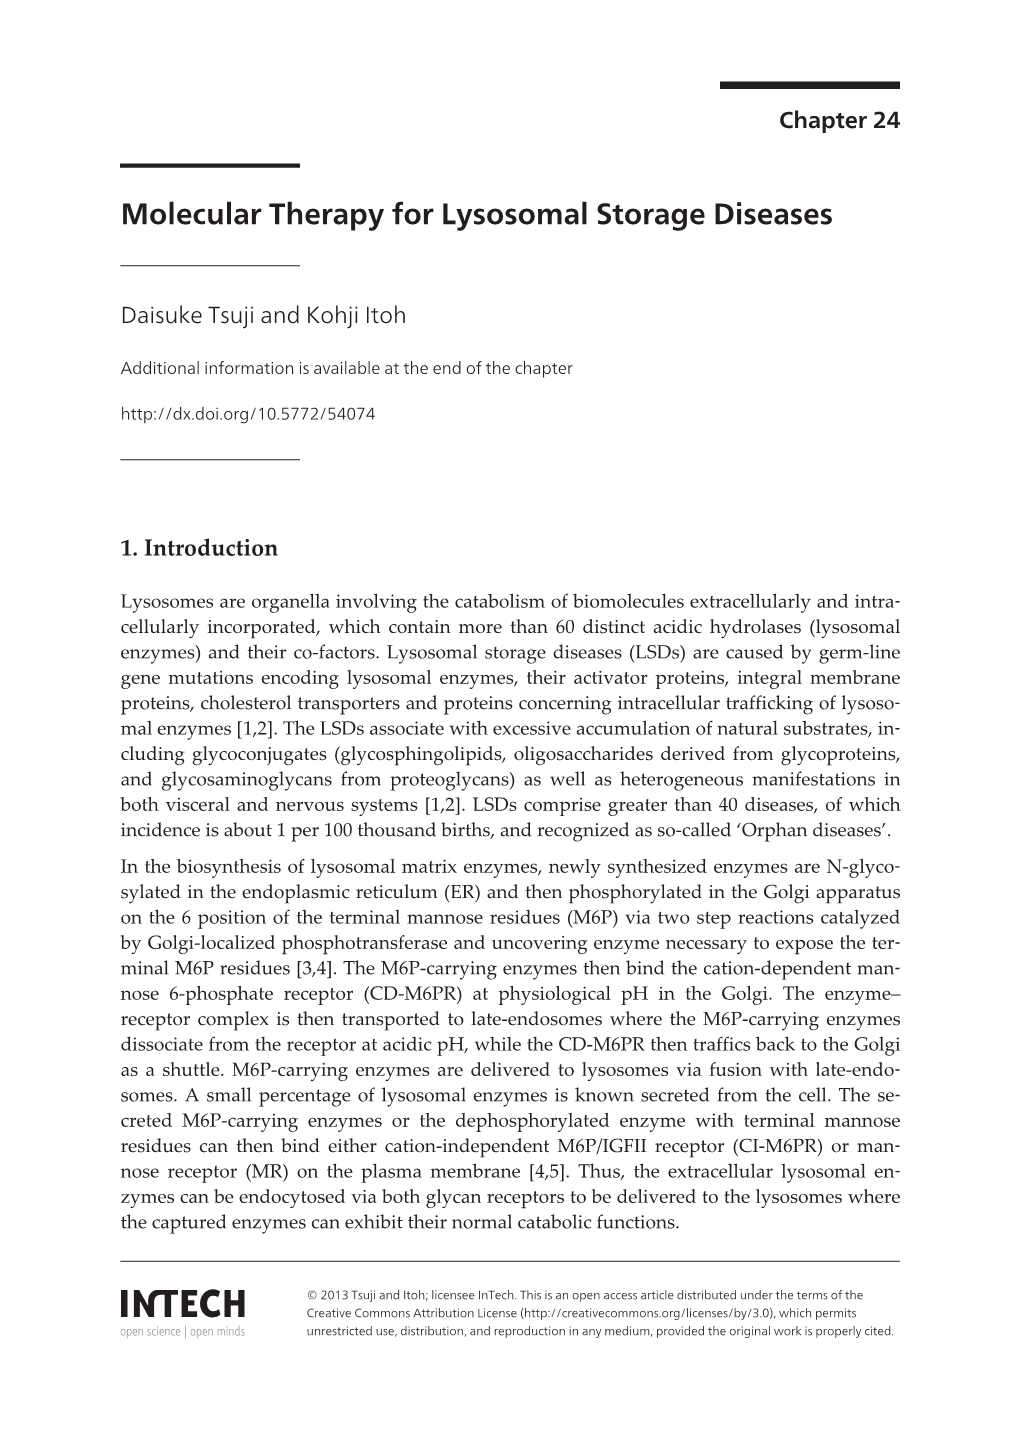 Molecular Therapy for Lysosomal Storage Diseases